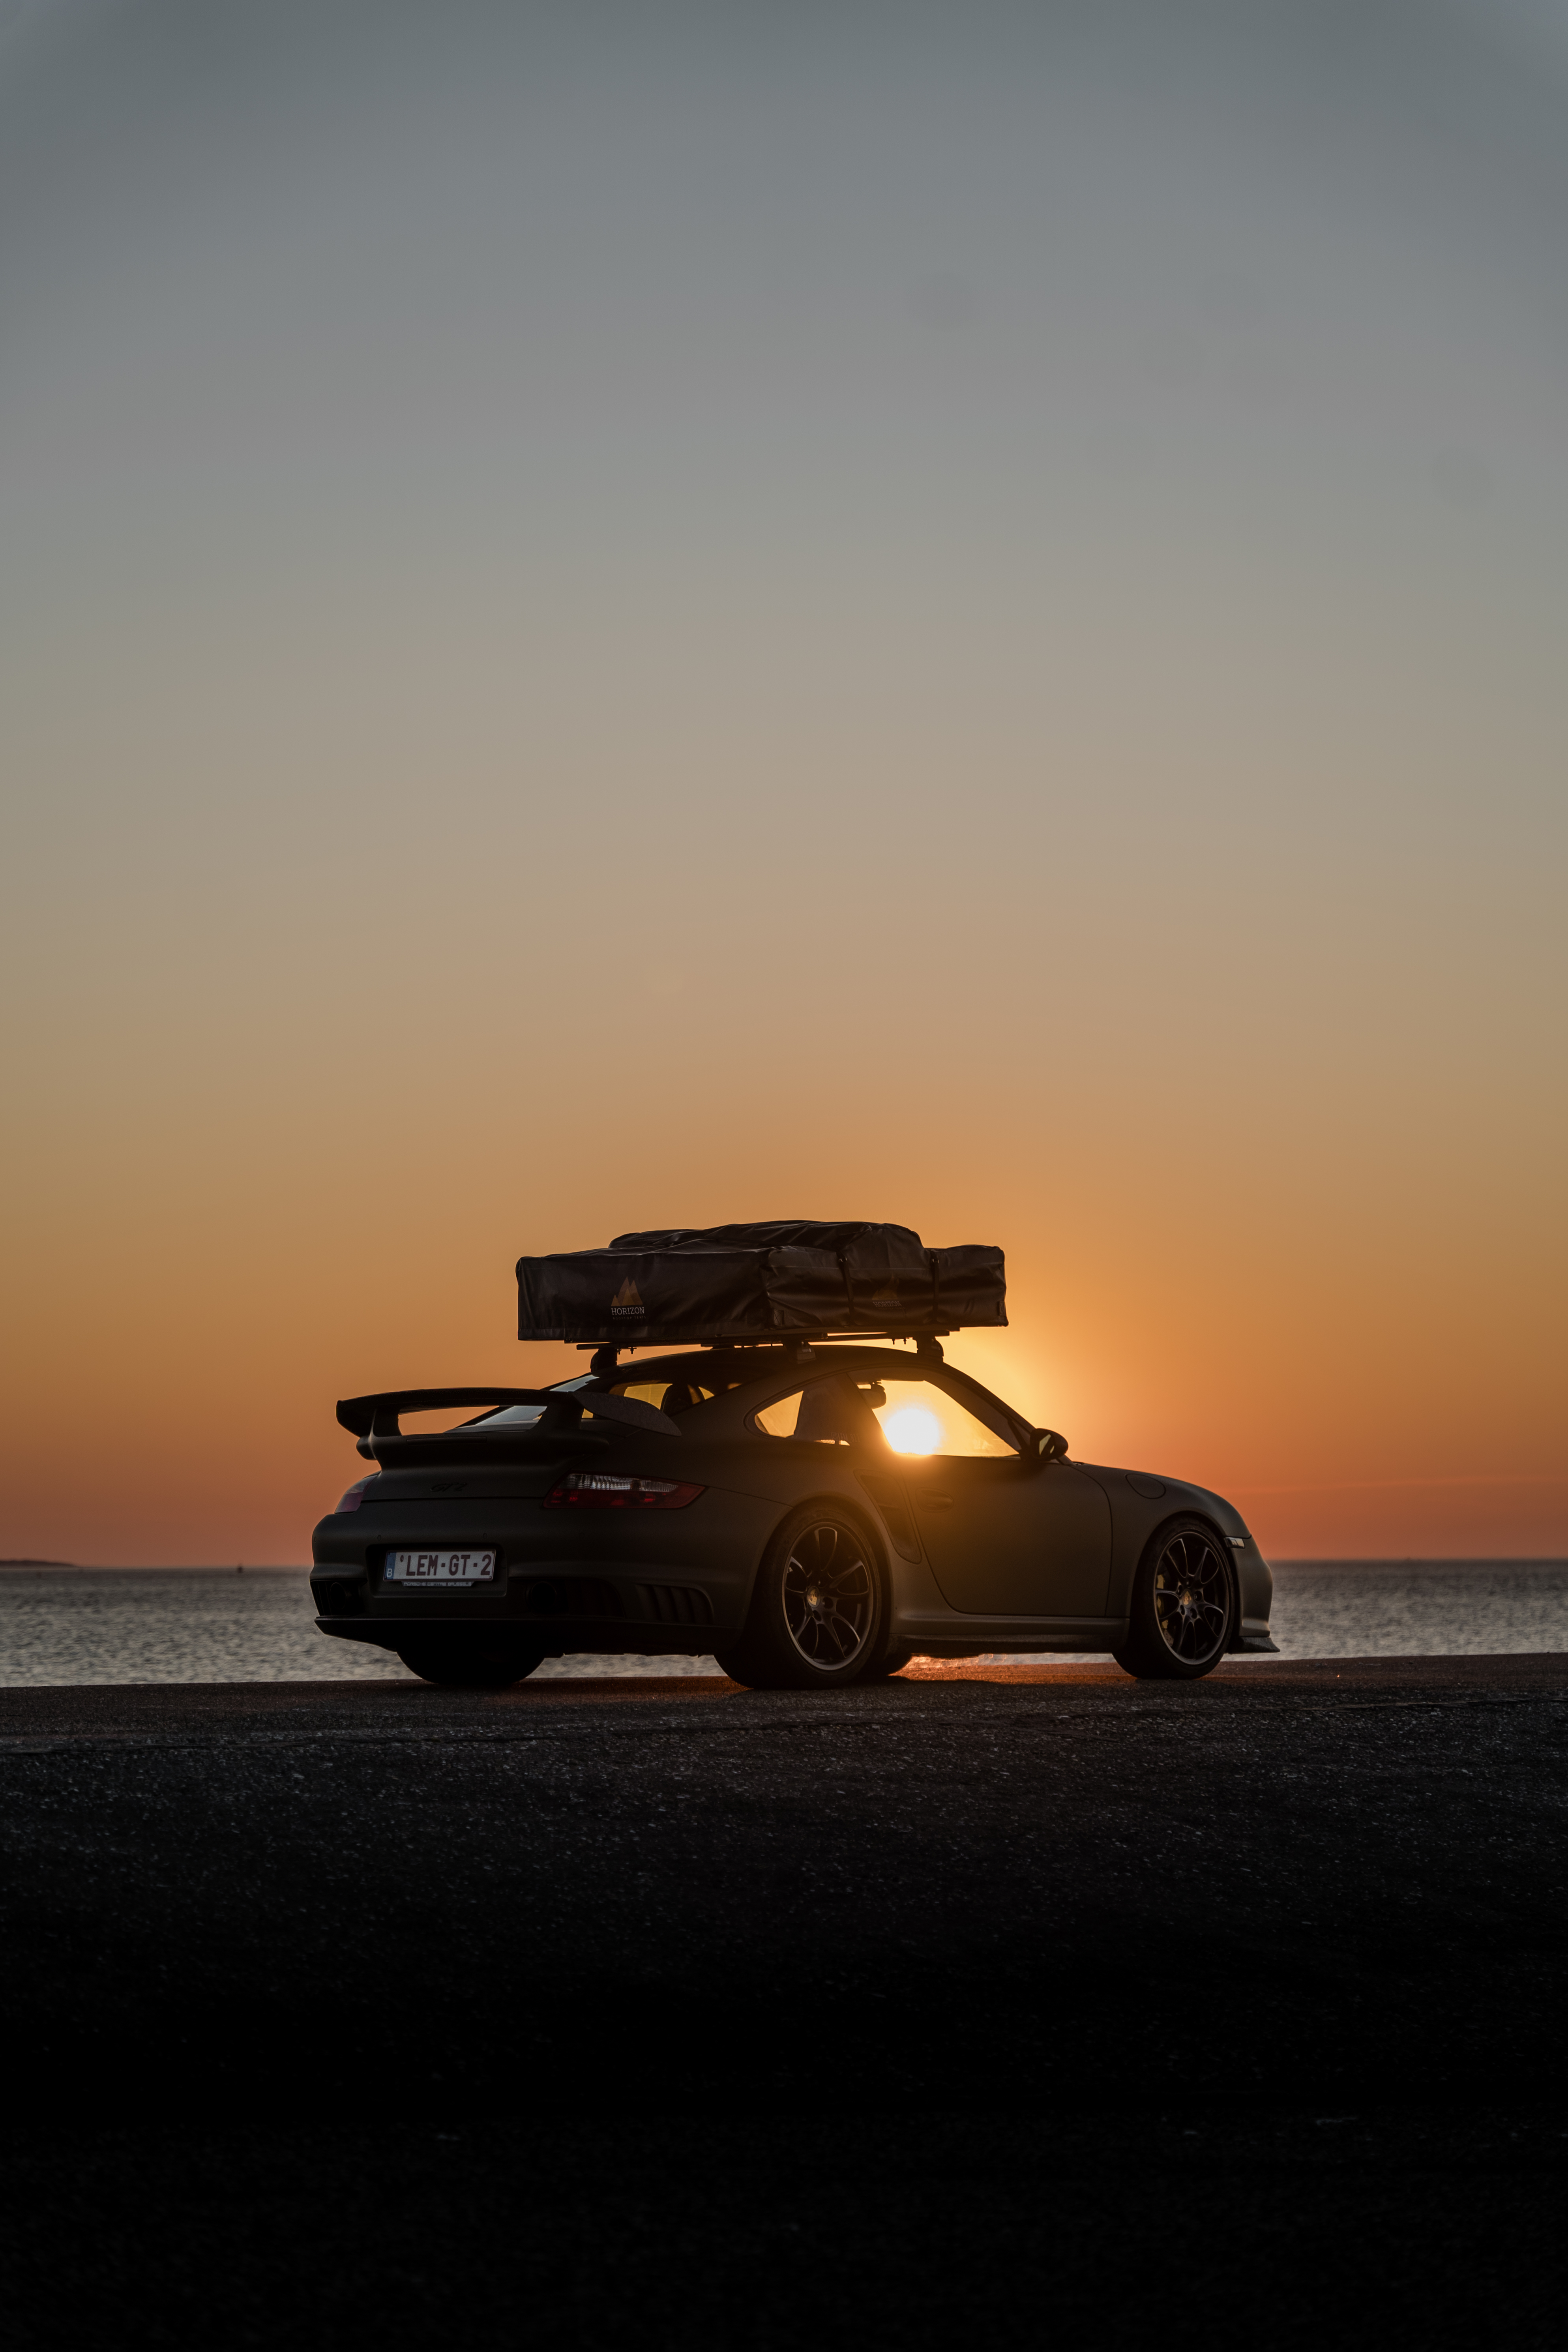 2008 Porsche 911 (997) GT2 with rooftent in sunset silhouette